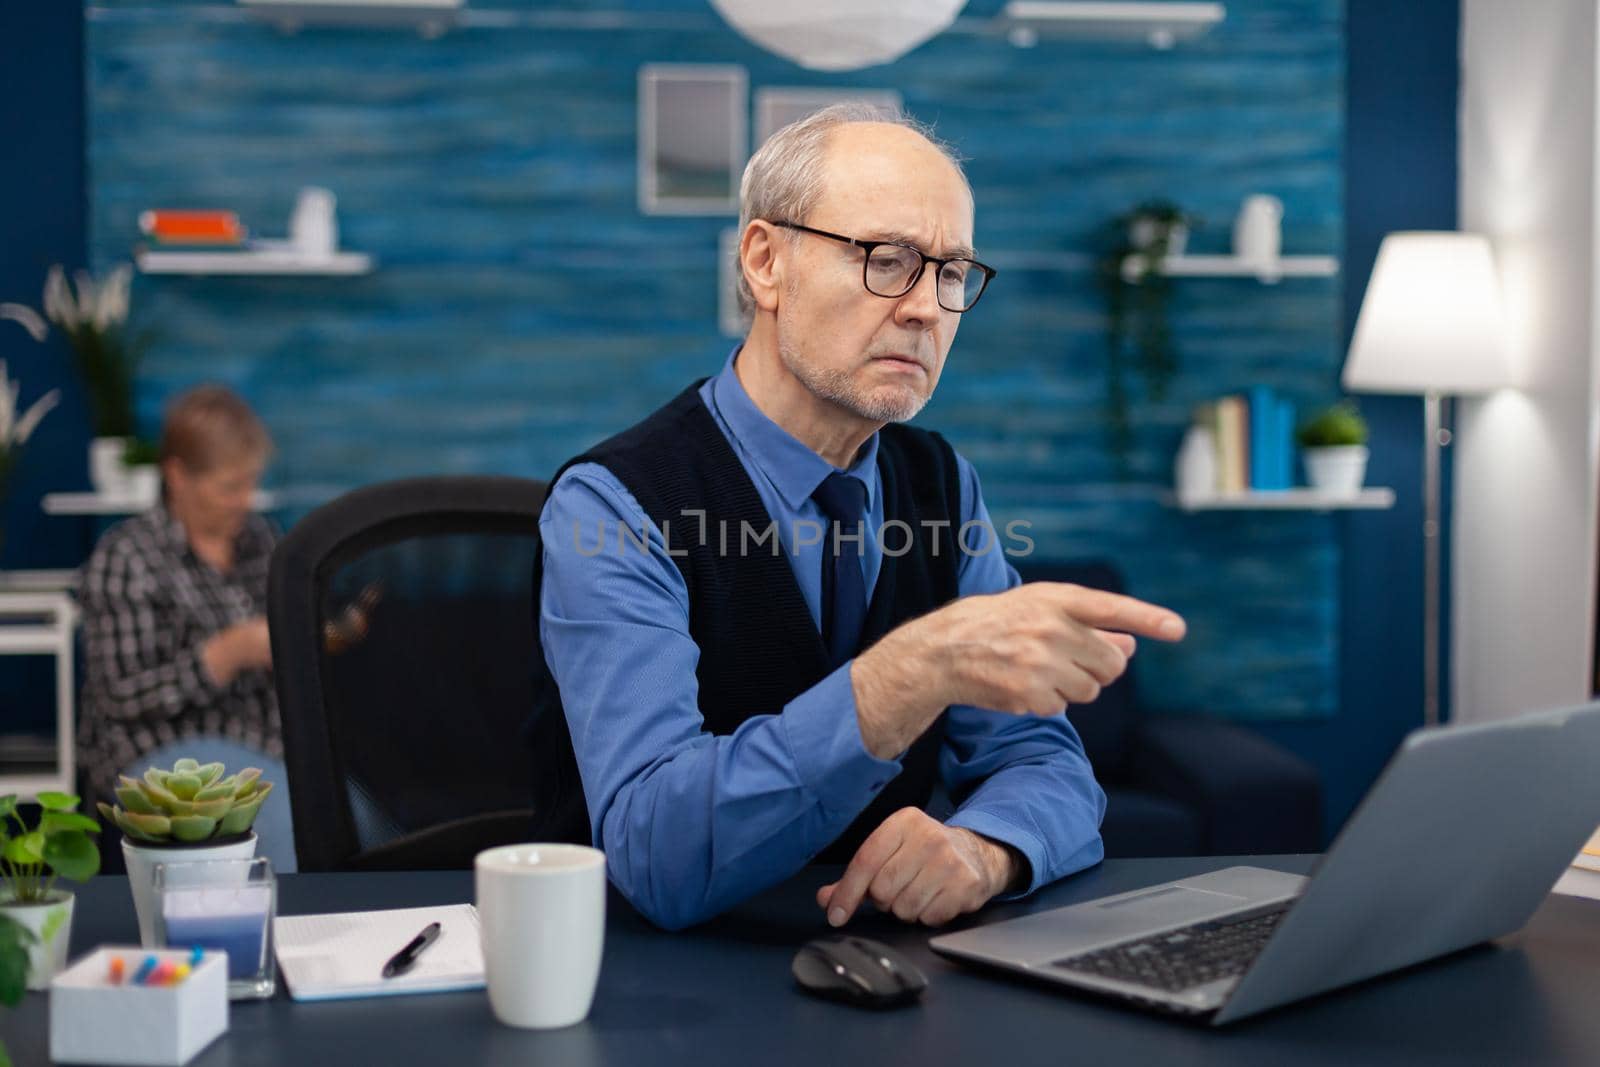 Thoughtfull senior businessman pointing at laptop whille working from home. Elderly man entrepreneur in home workplace using portable computer sitting at desk while wife is holding tv remote.